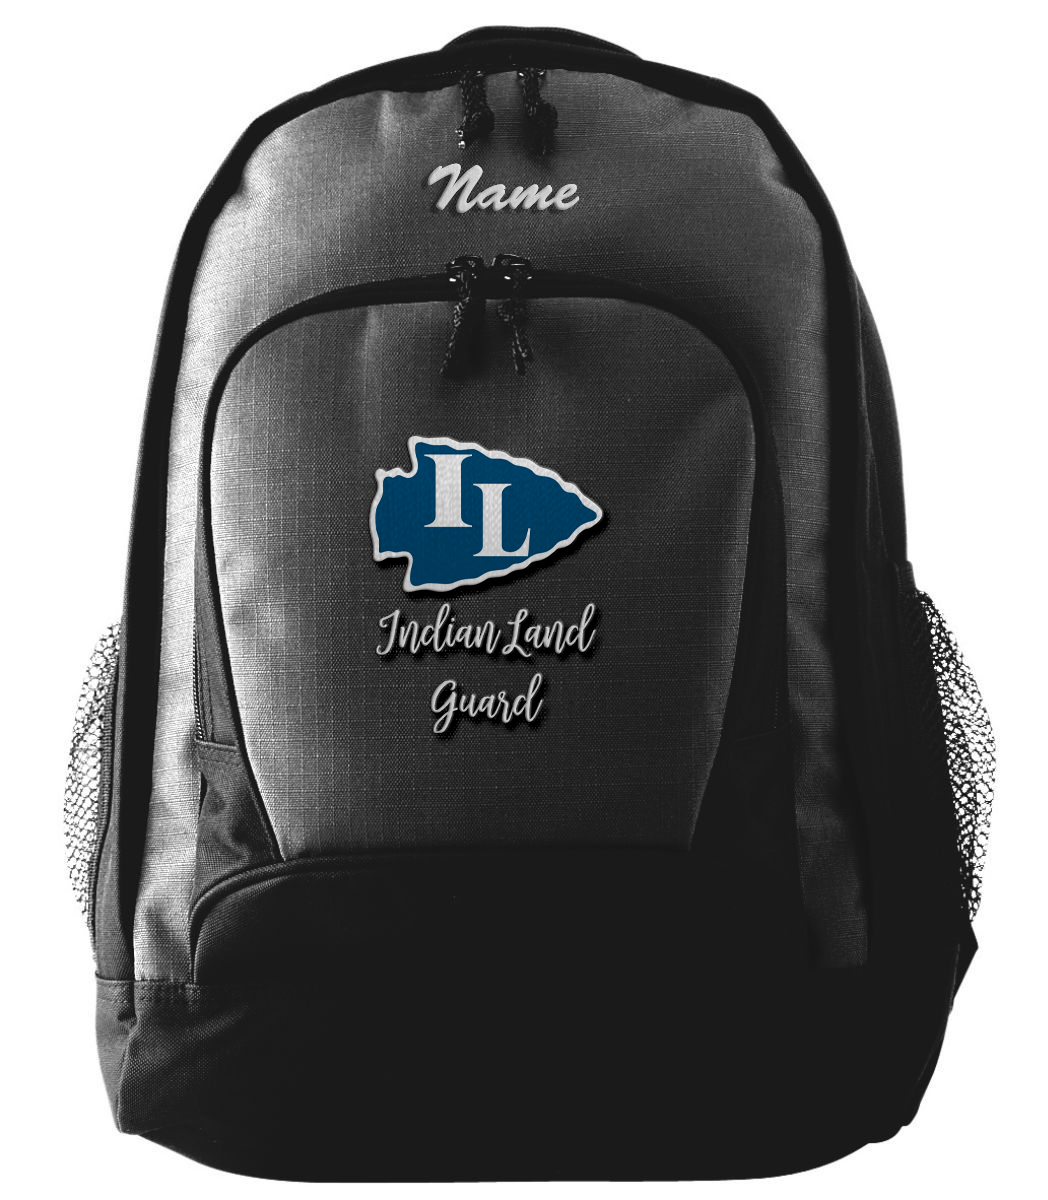 Indian Land Color Guard Embroidered Ripstop Backpack w/ Name & Logo